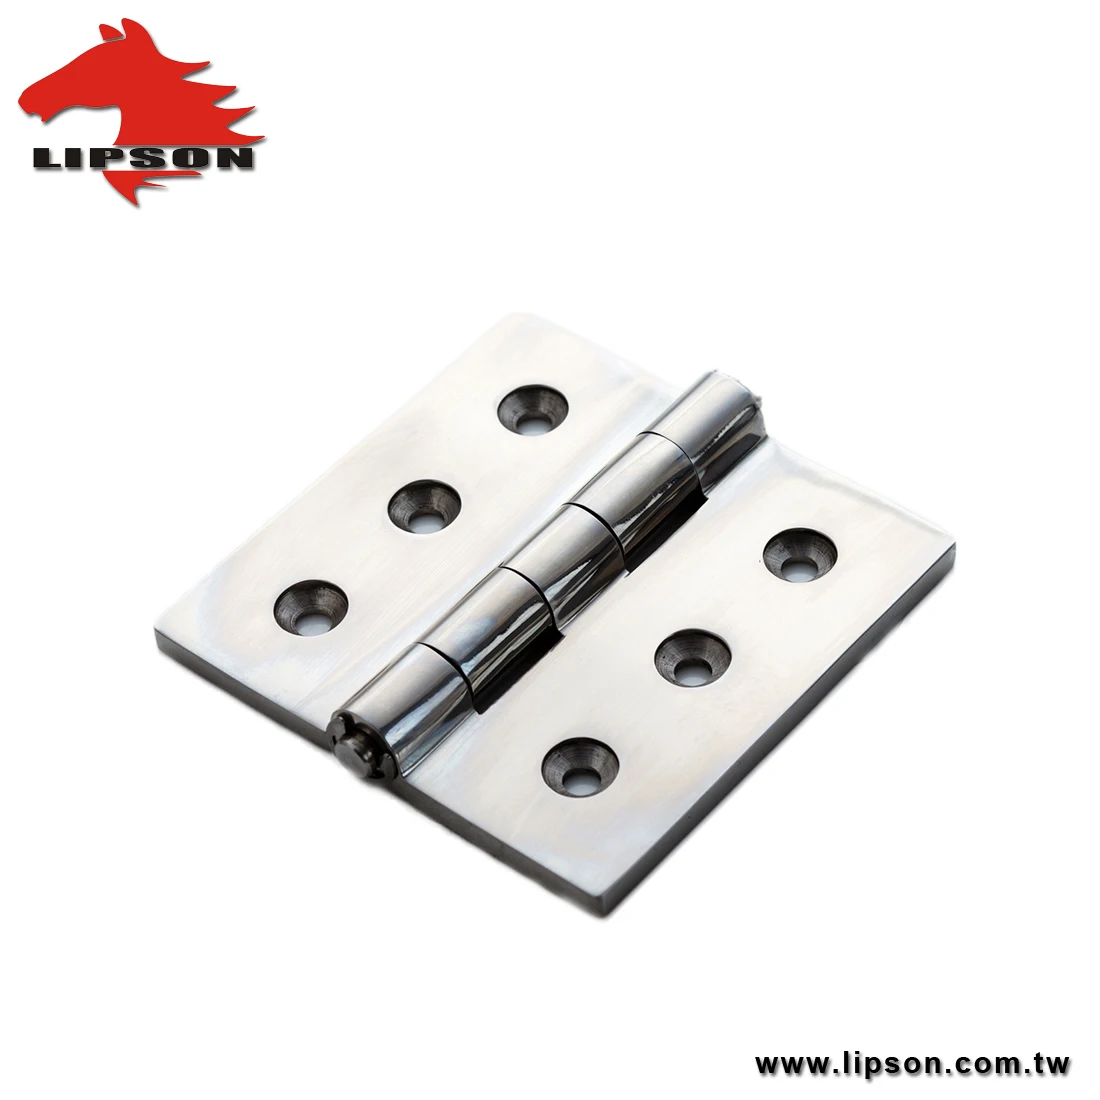 Hl 200 1 Truck Bus Rail Outdoor Application Stainless Steel Heavy